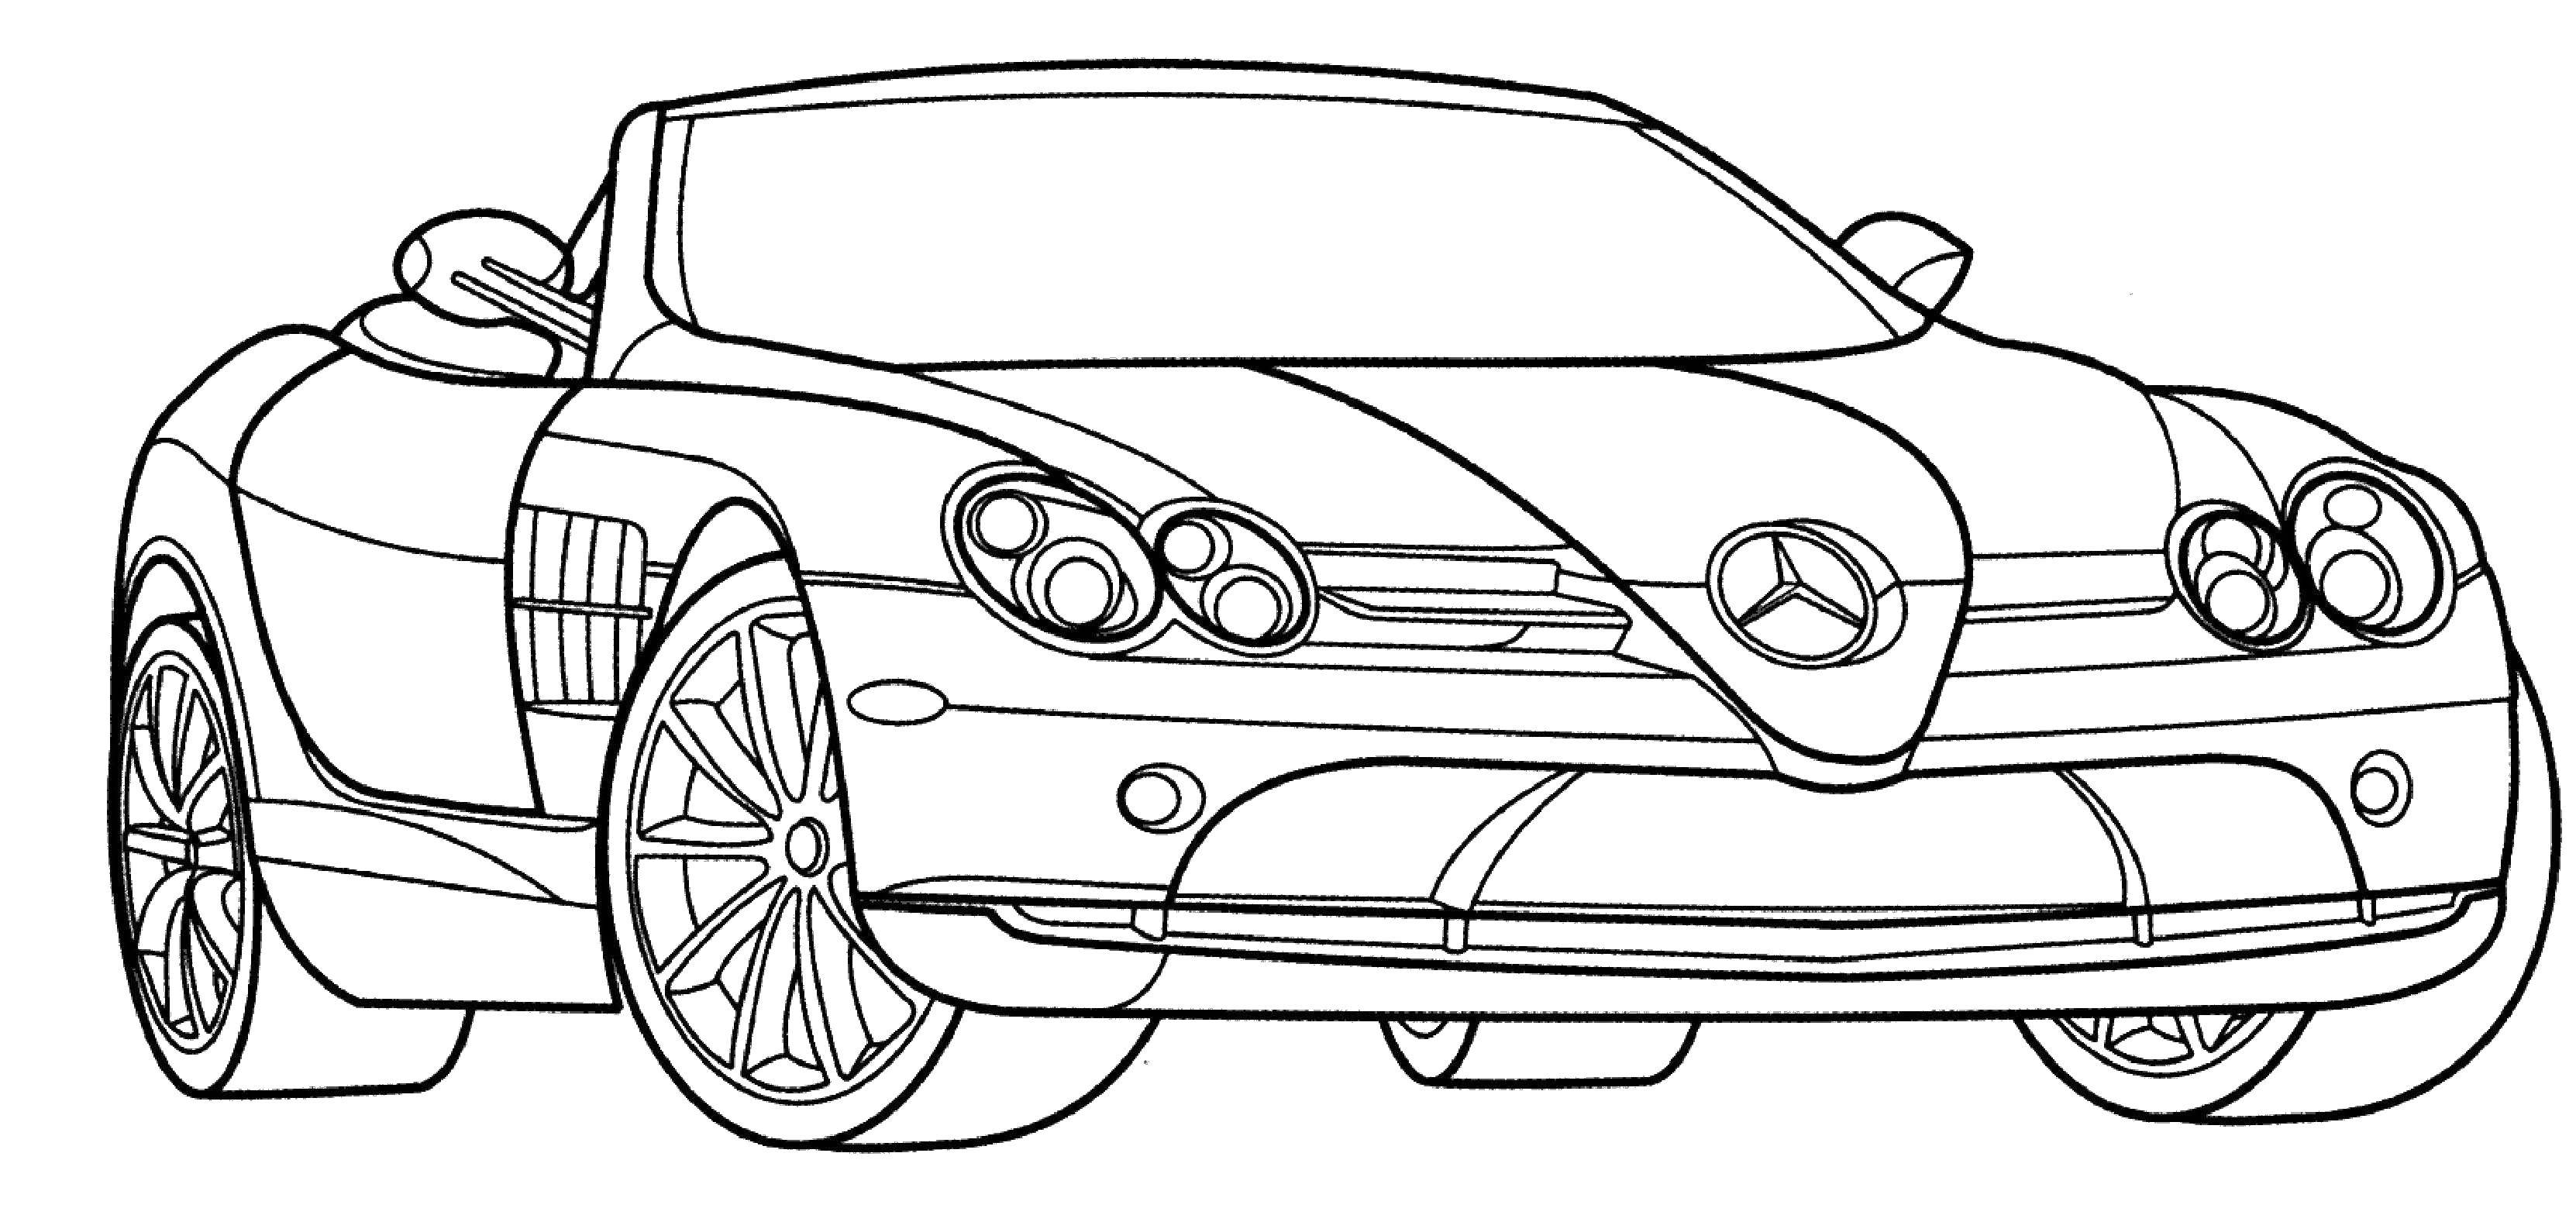 Coloring Mercedes. Category machine . Tags:  machine, transportation, Mercedes.